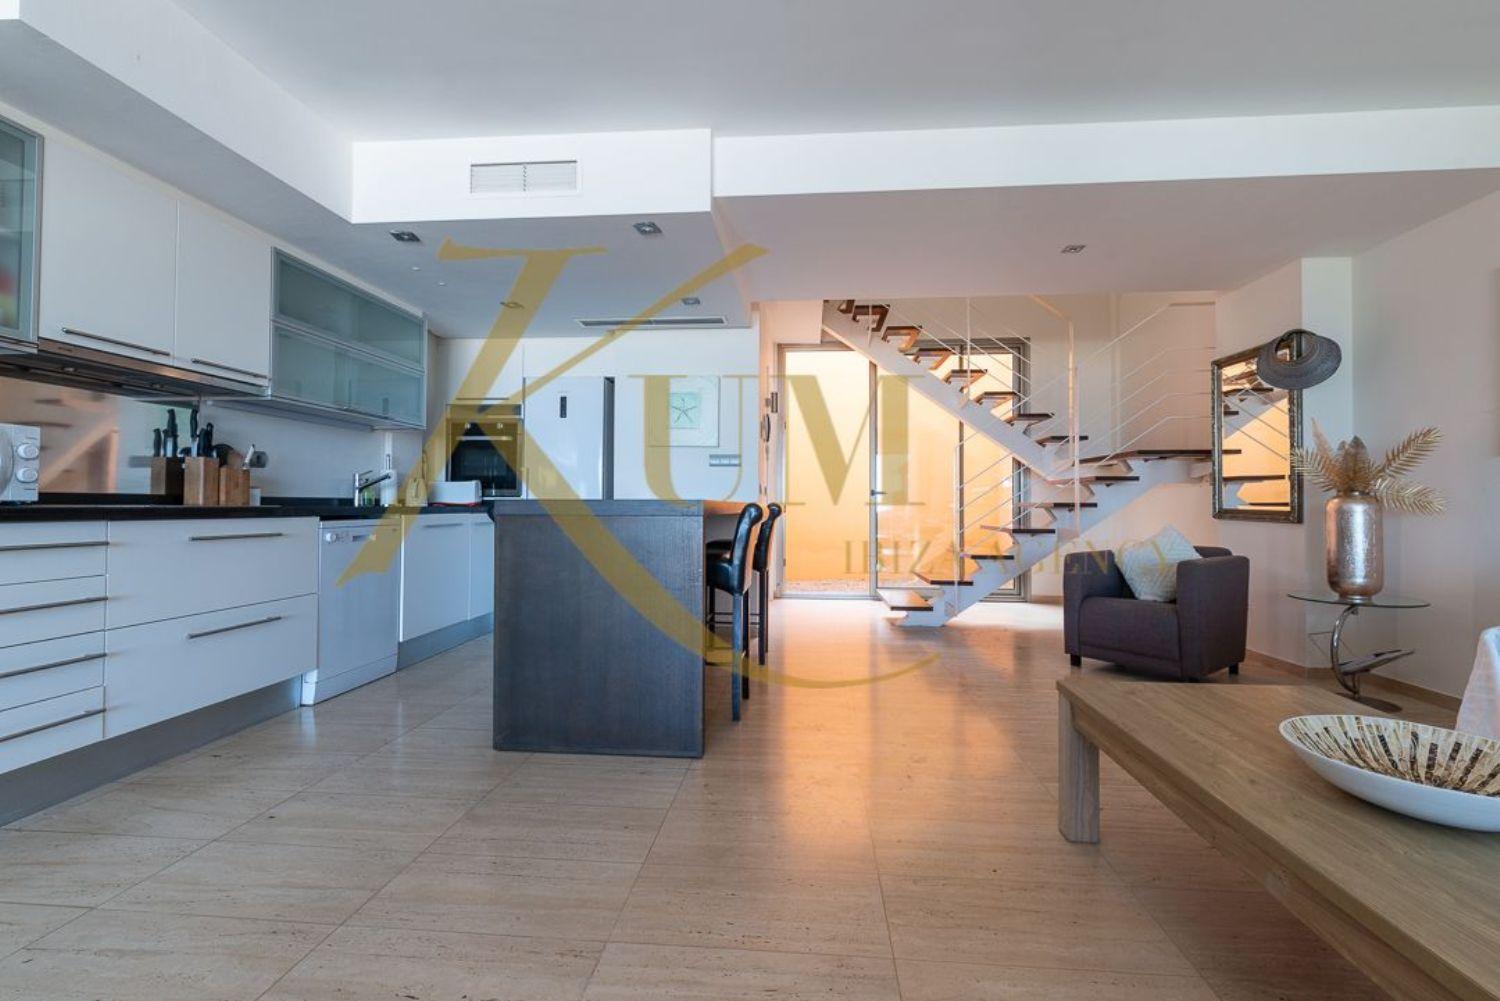 Beautiful duplex in a private urbanization with swimming pool and views of Es Vedrá.